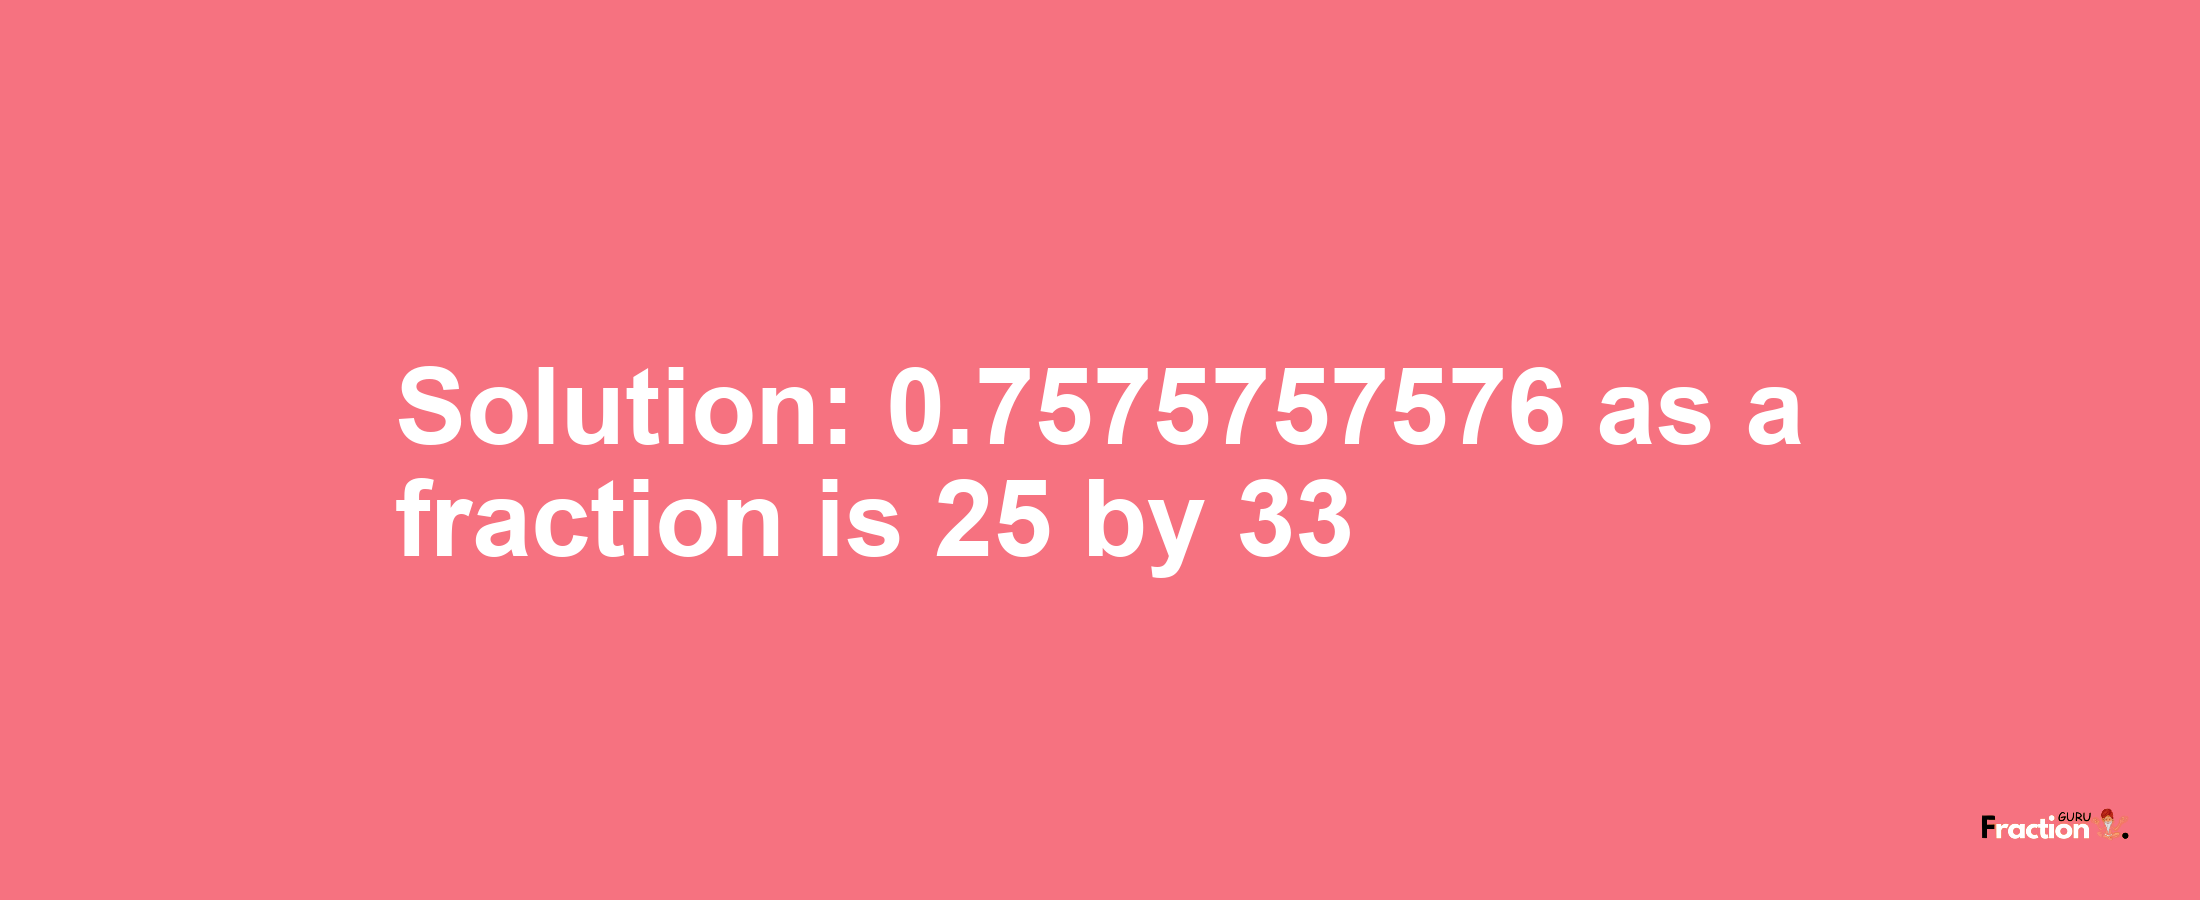 Solution:0.7575757576 as a fraction is 25/33